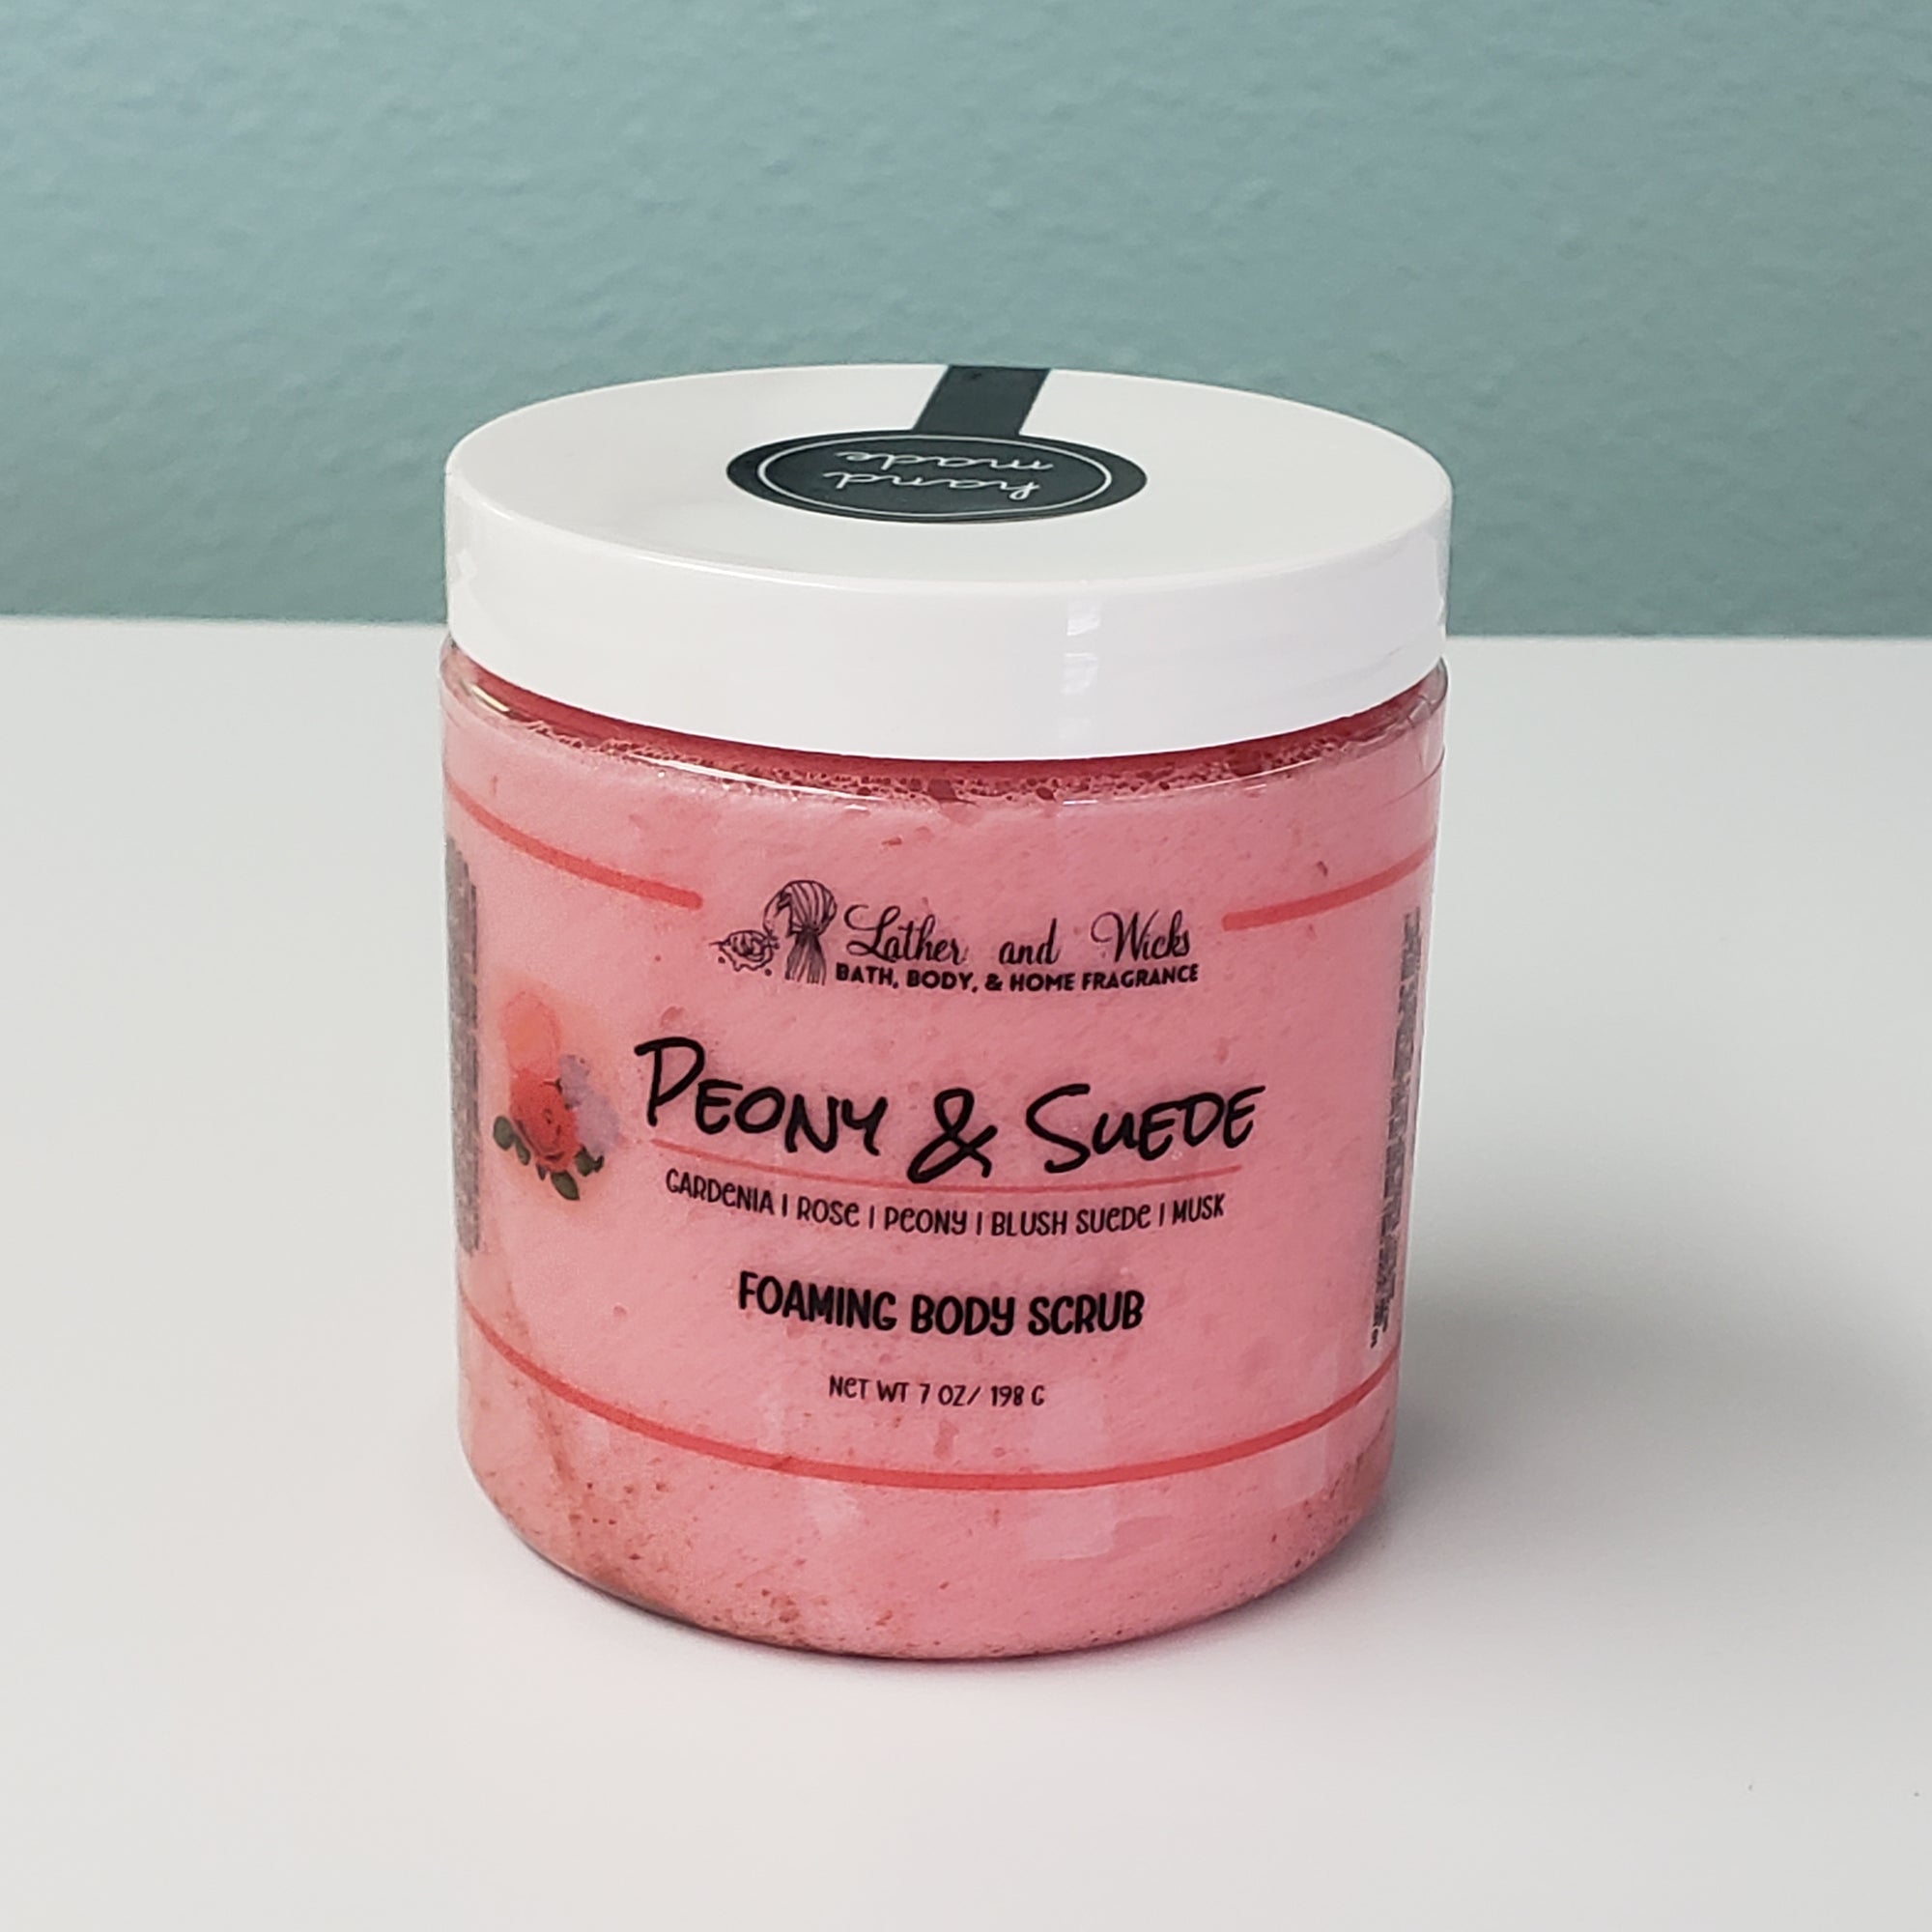 Peony and Suede Foaming Body Scrub Lather and Wicks